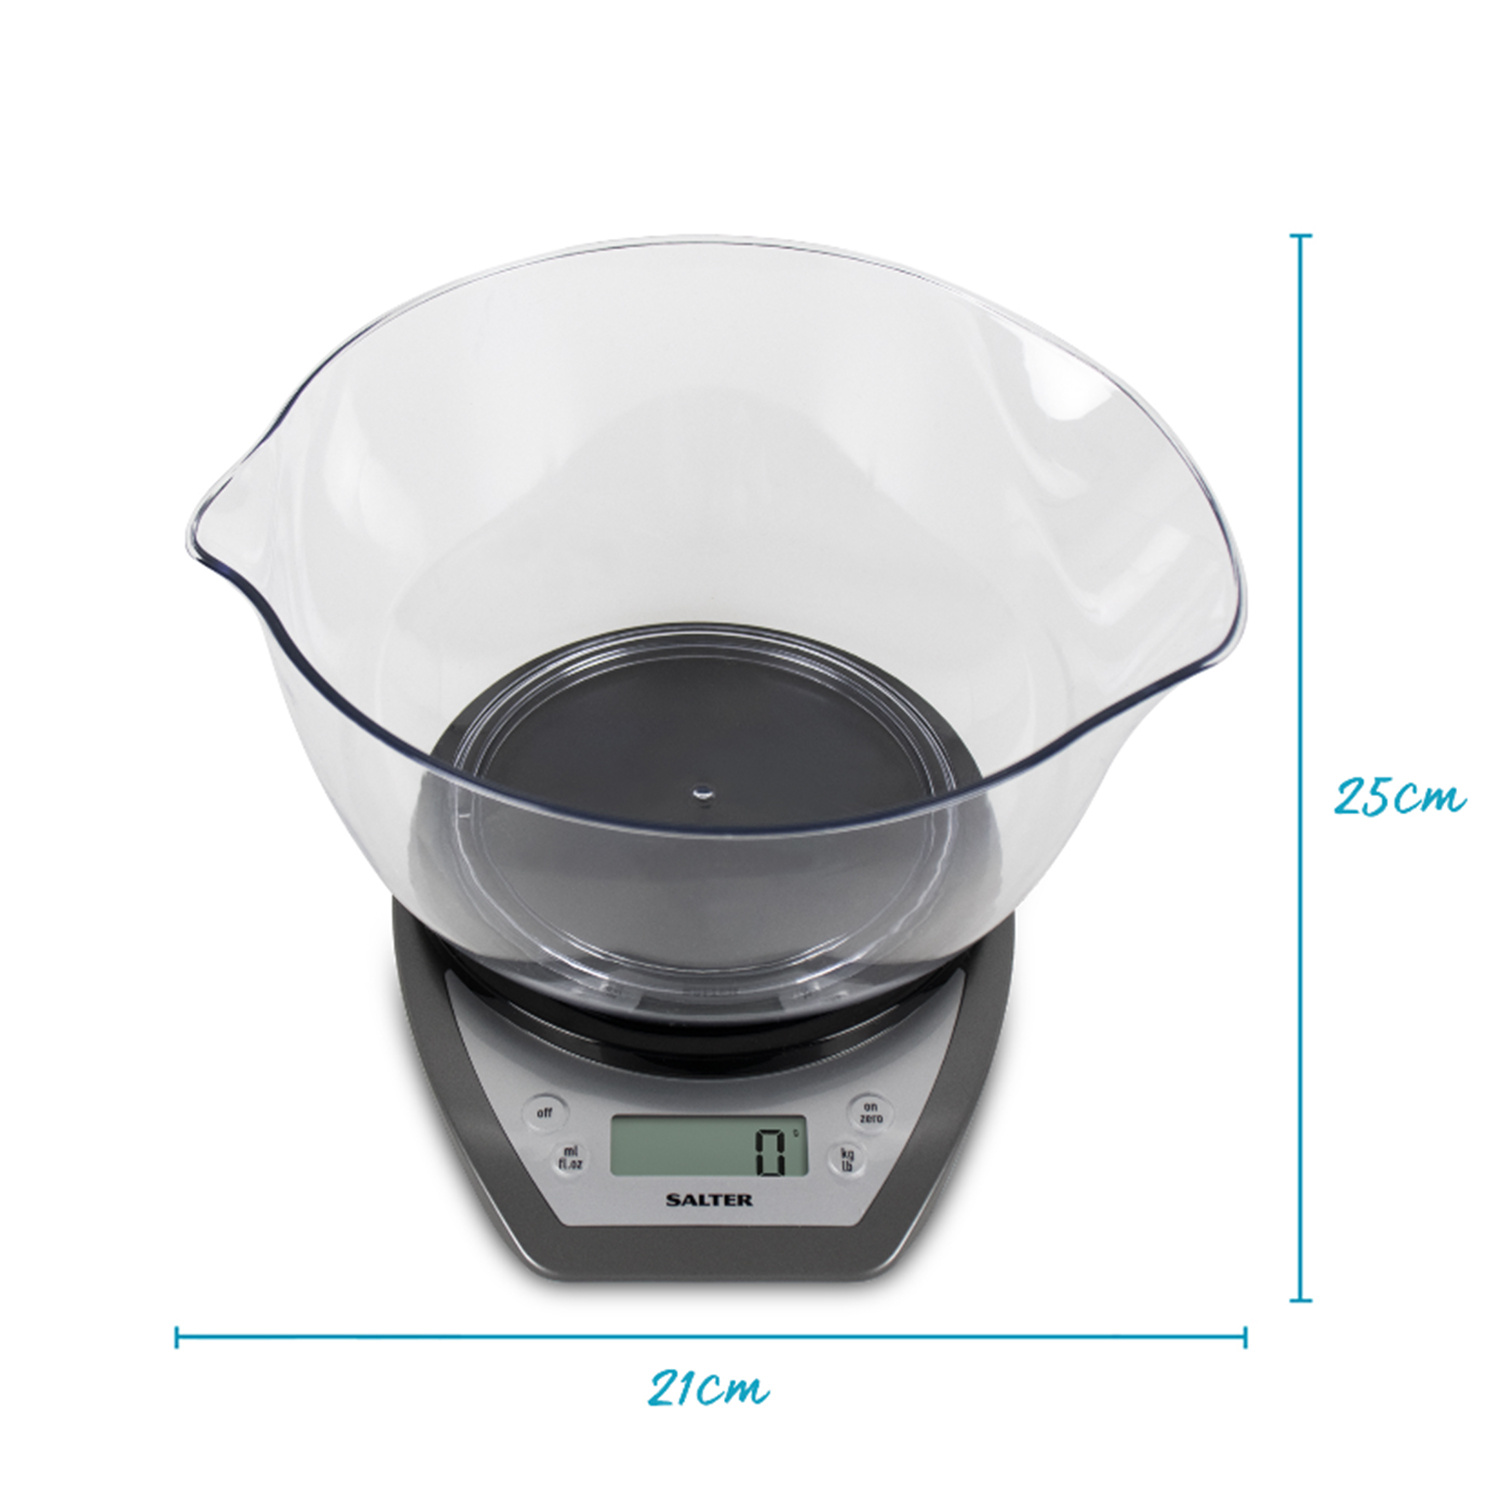 Salter Grey Electronic Kitchen Scale with Mixing Bowl Image 5